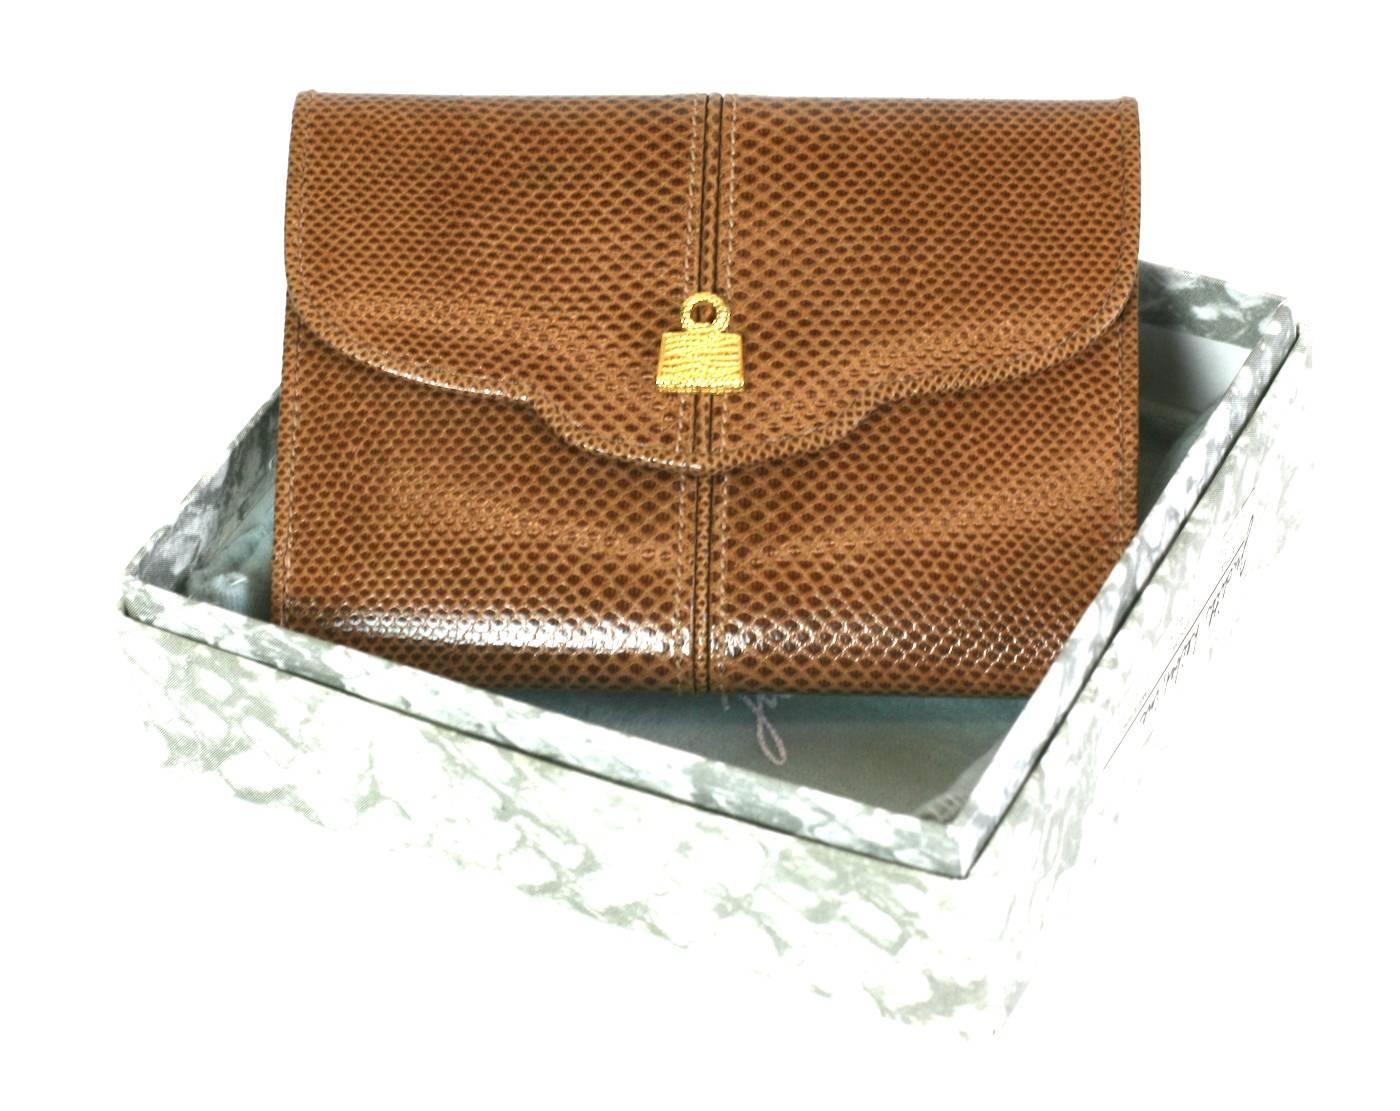 Judith Leiber Snakeskin Wallet with billfold section and change purse under flap. Signature 